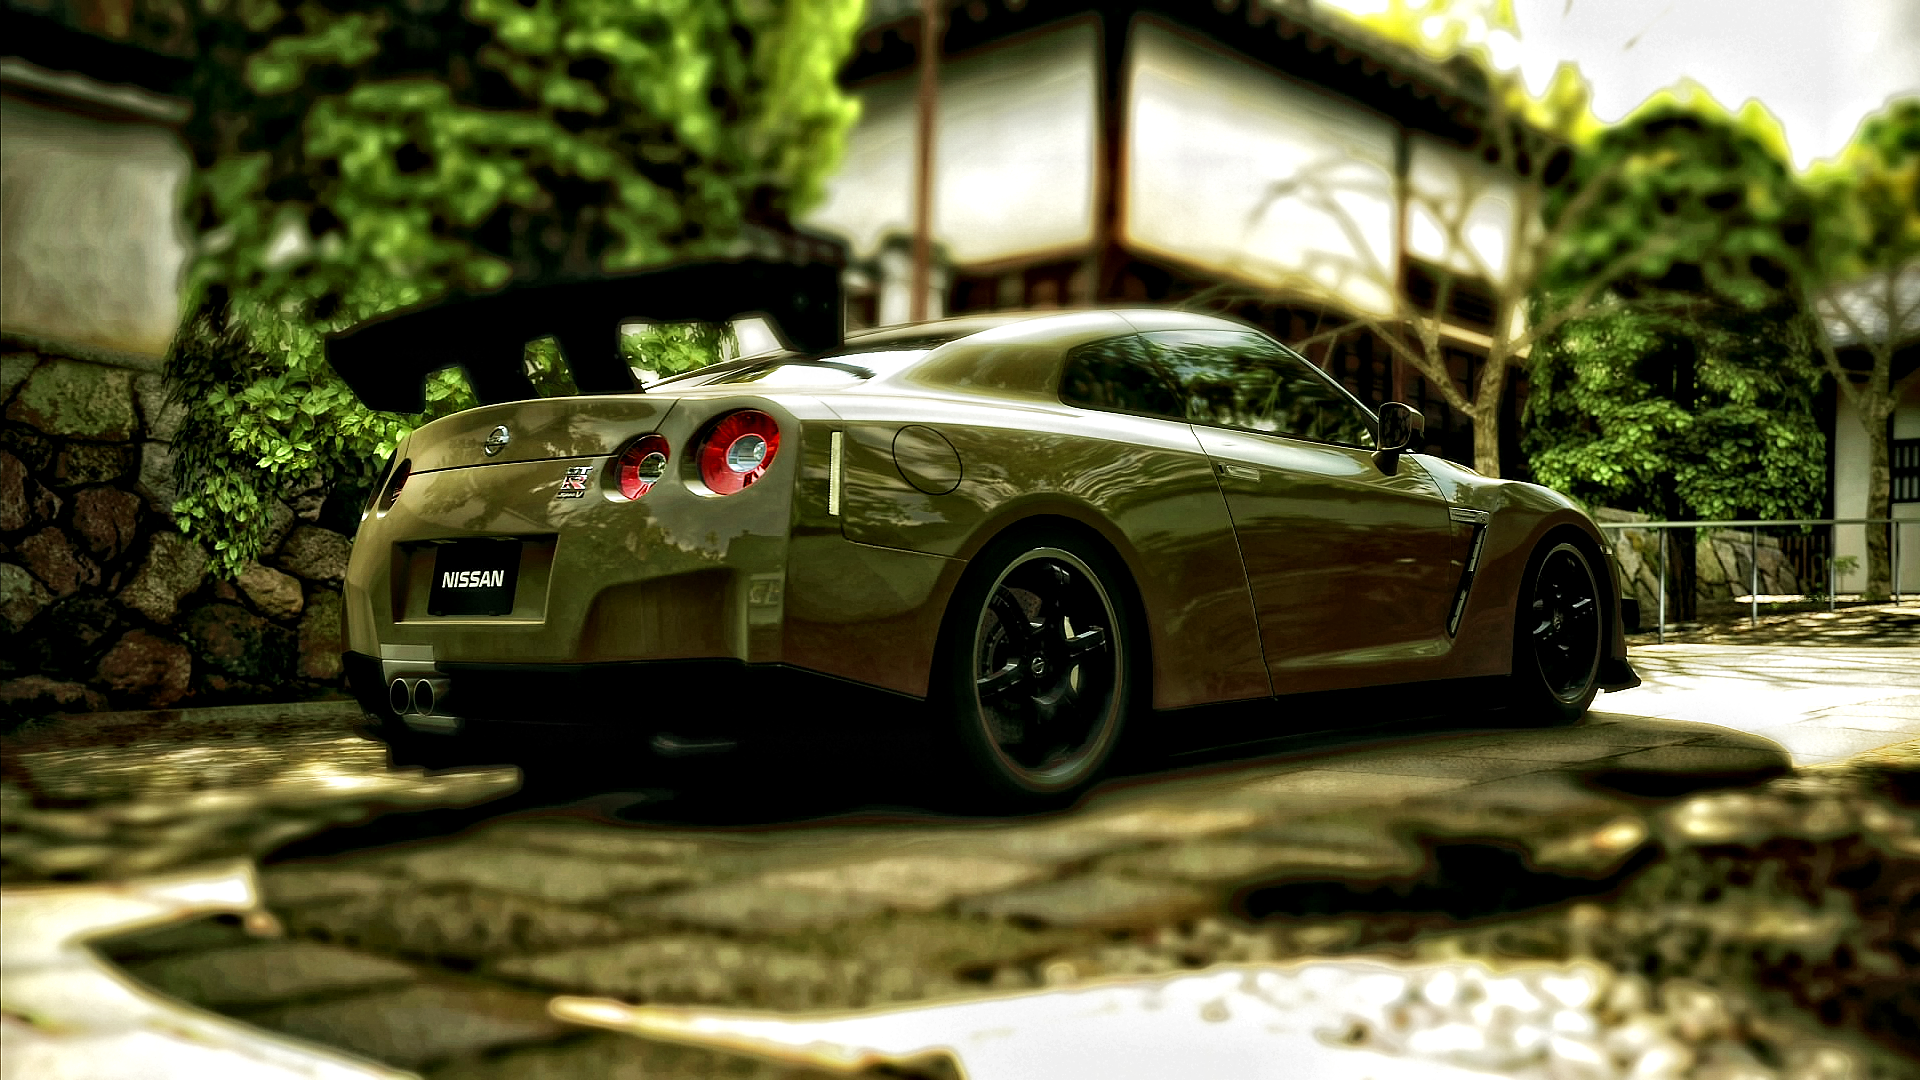 General 1920x1080 Nissan car vehicle Nissan GT-R sports car Japanese cars rear view sunlight blurred blurry background trees